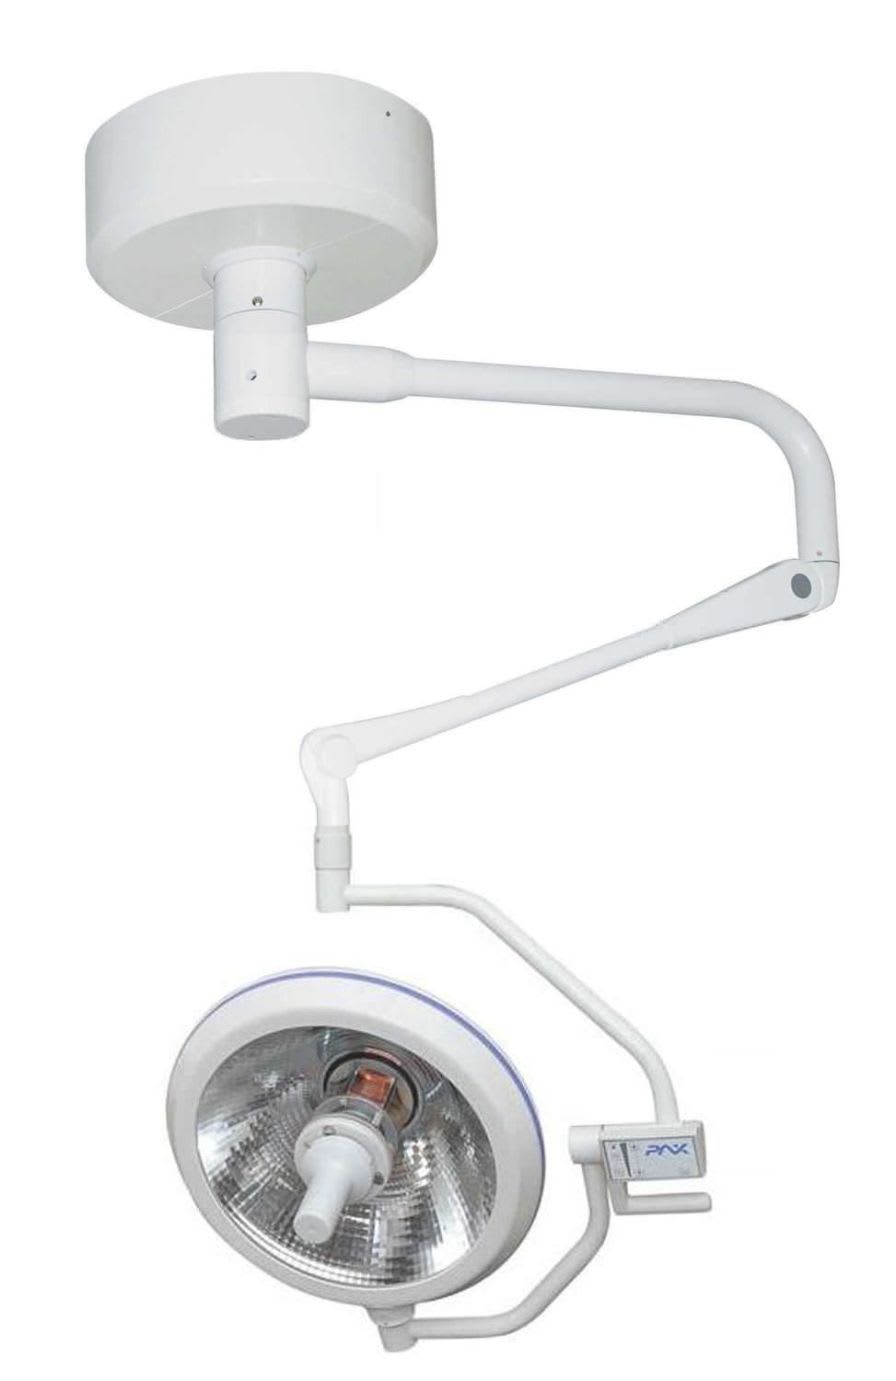 Halogen surgical light / ceiling-mounted / 1-arm F700 Pax Medical Instrument